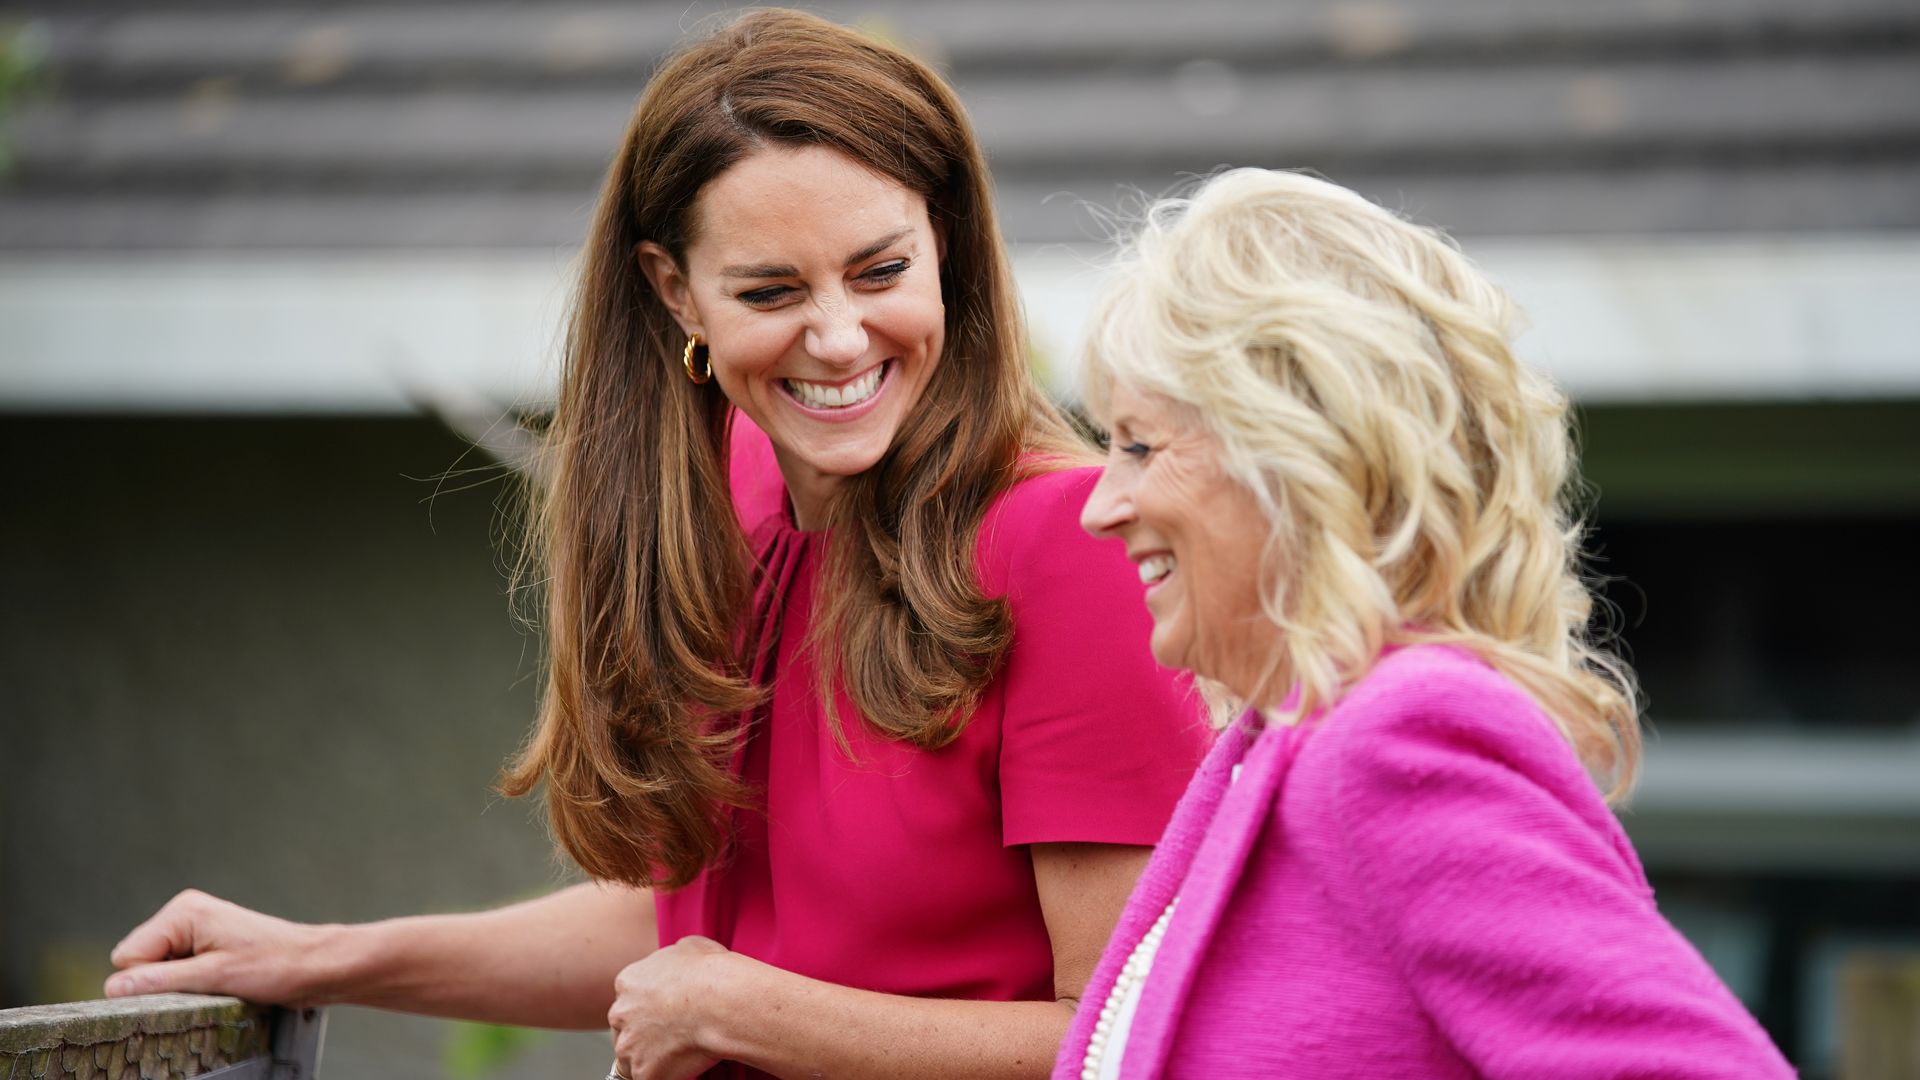 The Princess of Wales to reunite with First Lady Jill Biden after surprise invite?